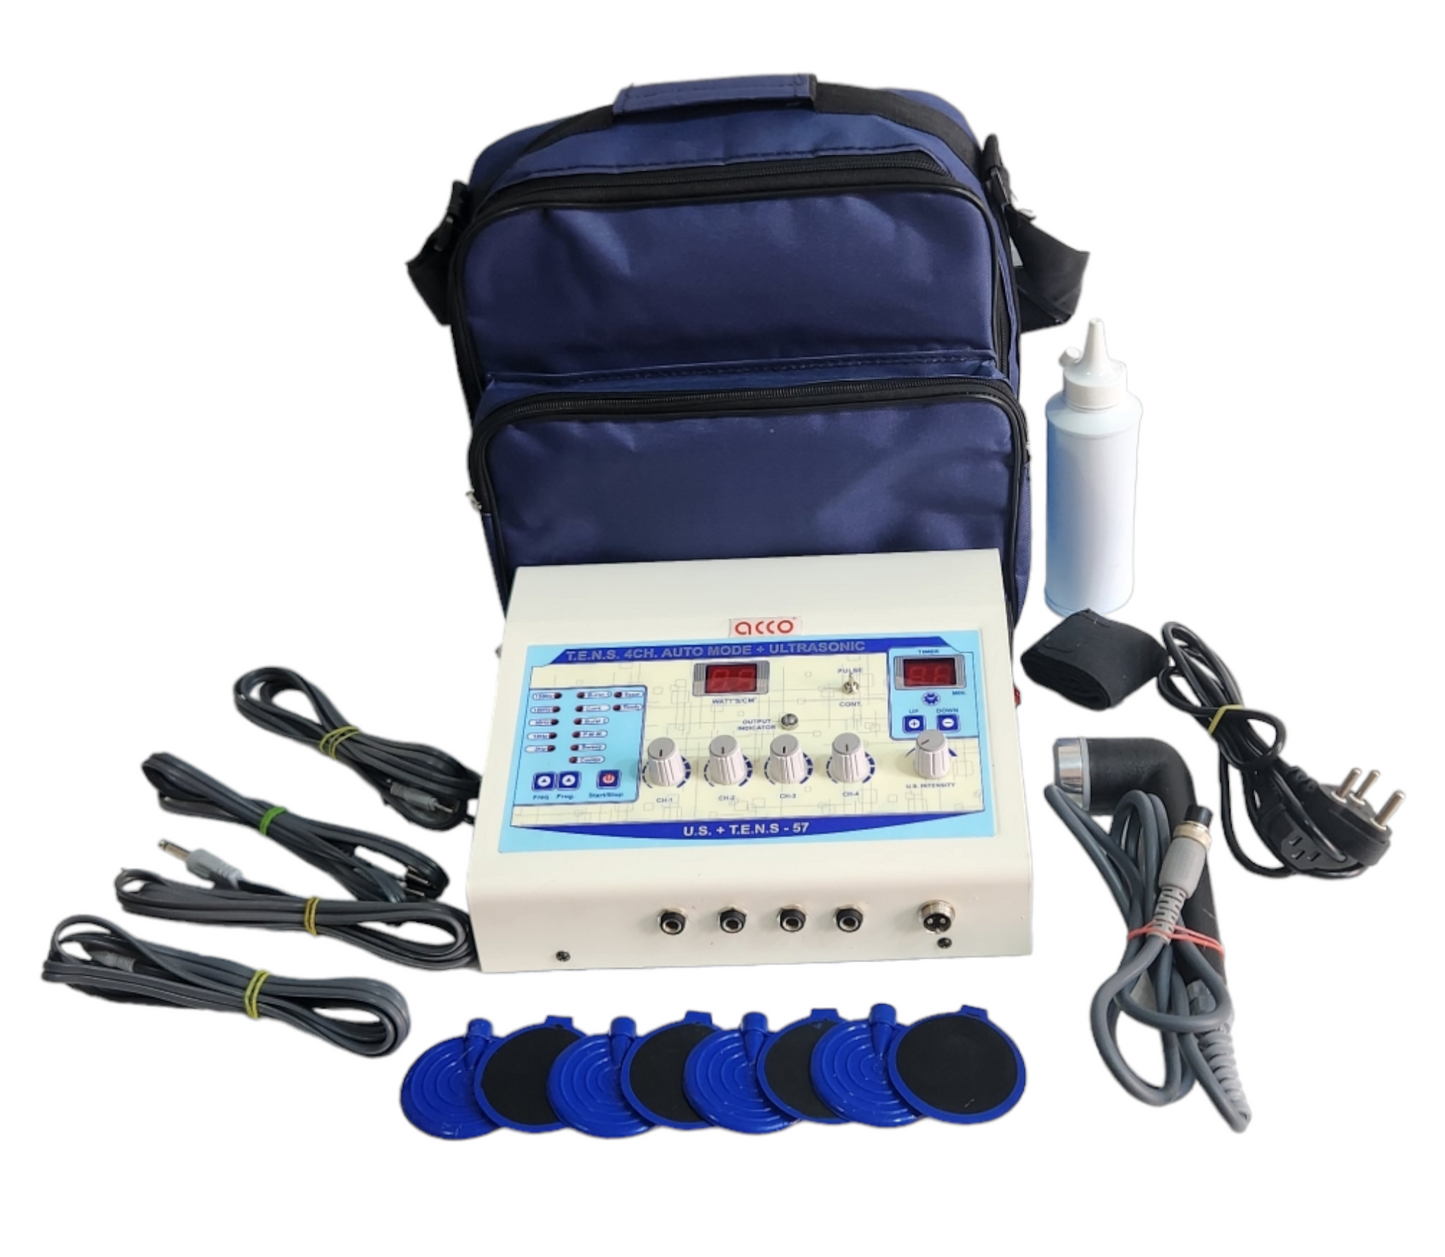 acco Tens 4 Ch + Ultrasonic 1Mhz Physiotherapy Combo